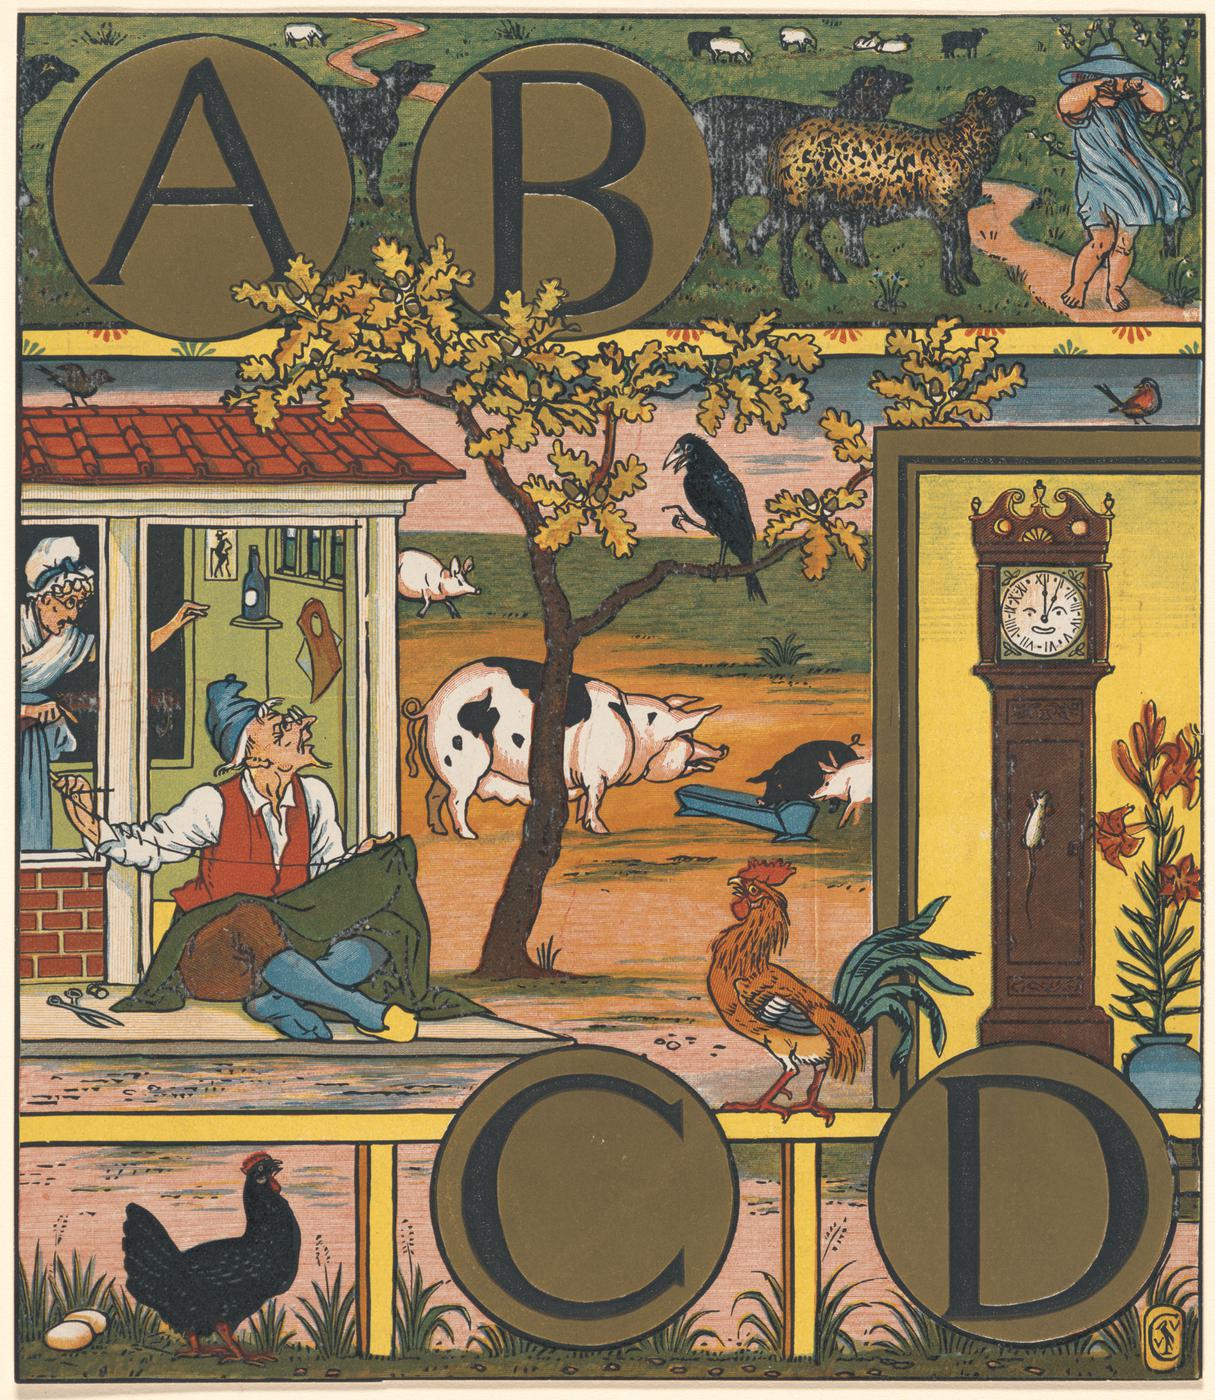 Engraving by Walter Crane featuring the letters A, B, C, and D in gold circles. At the center are several colorful depictions of farm animals and nursery rhyme characters.